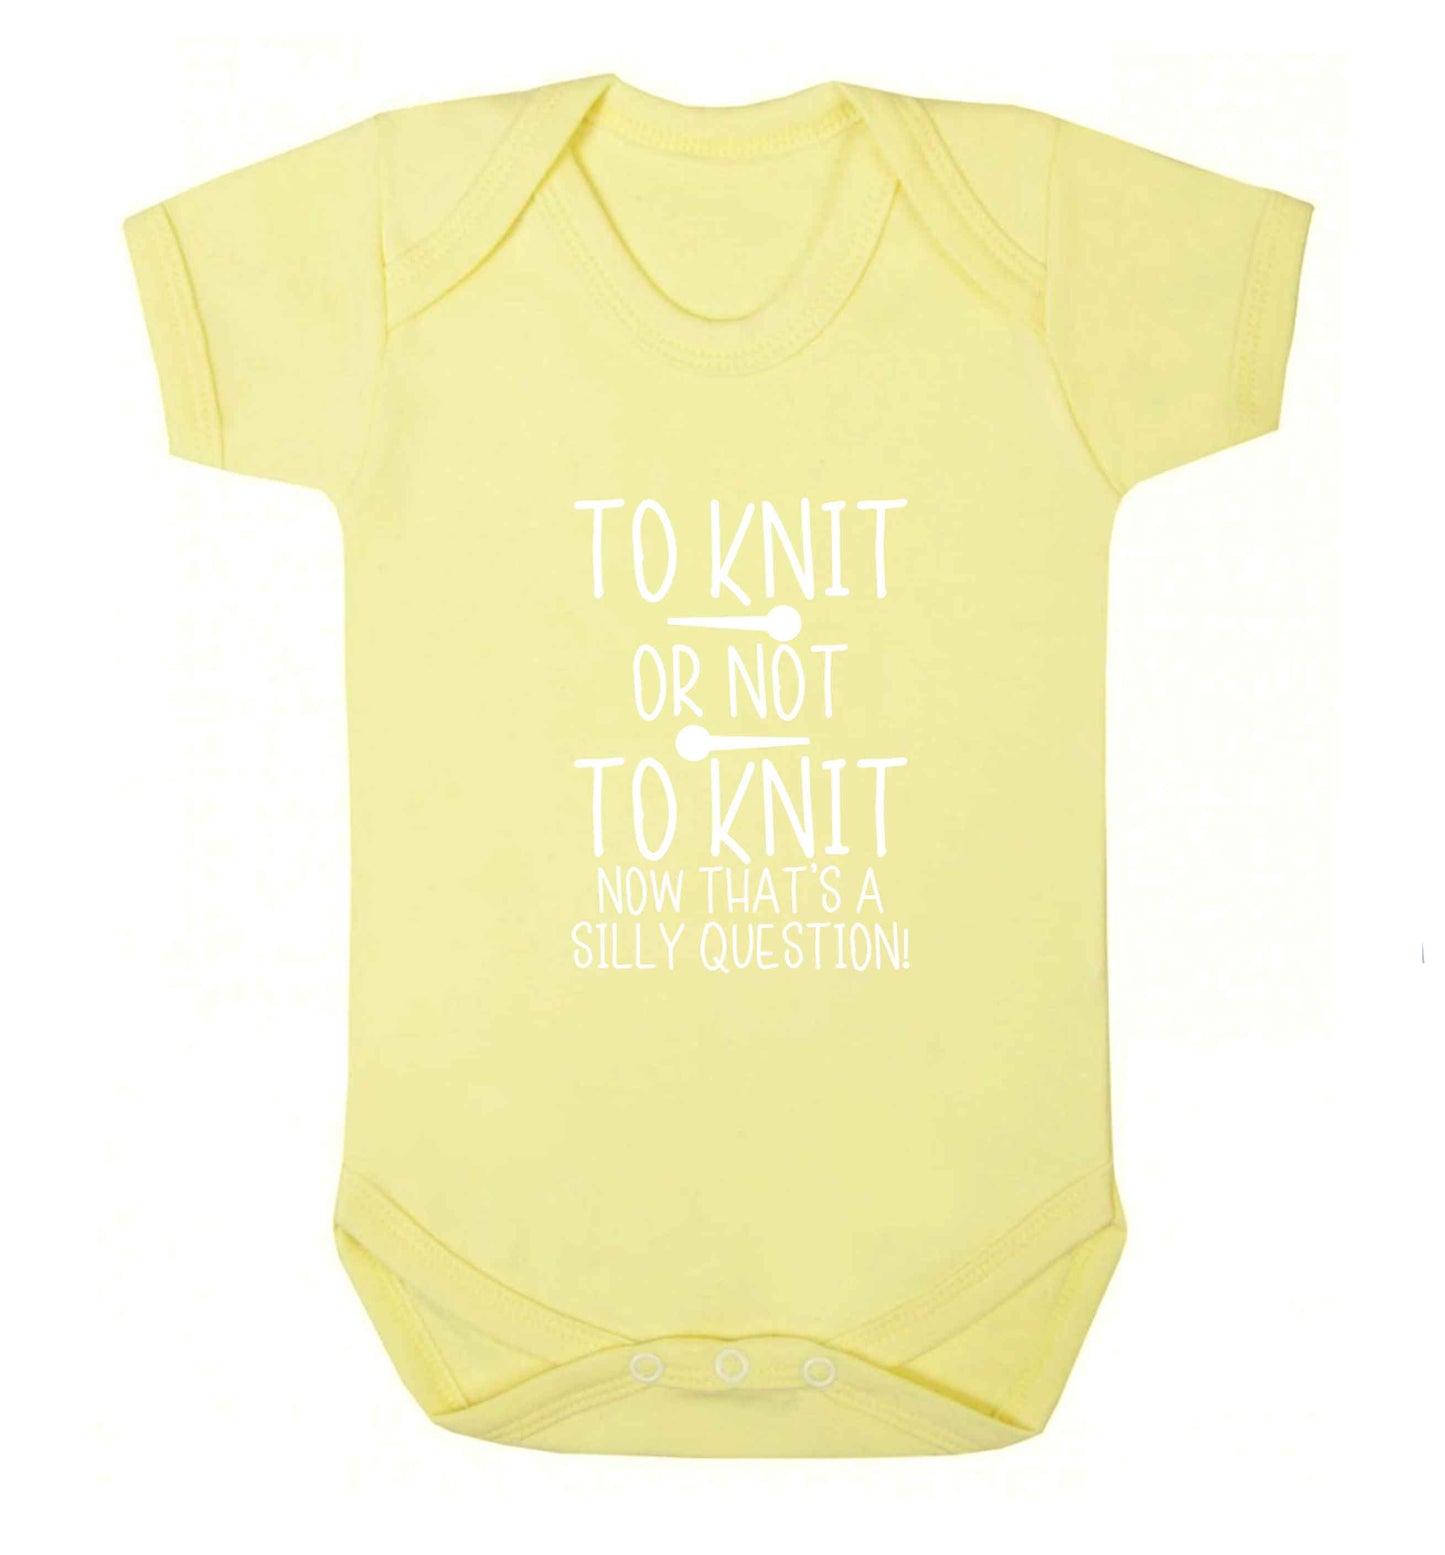 To knit or not to knit now that's a silly question baby vest pale yellow 18-24 months